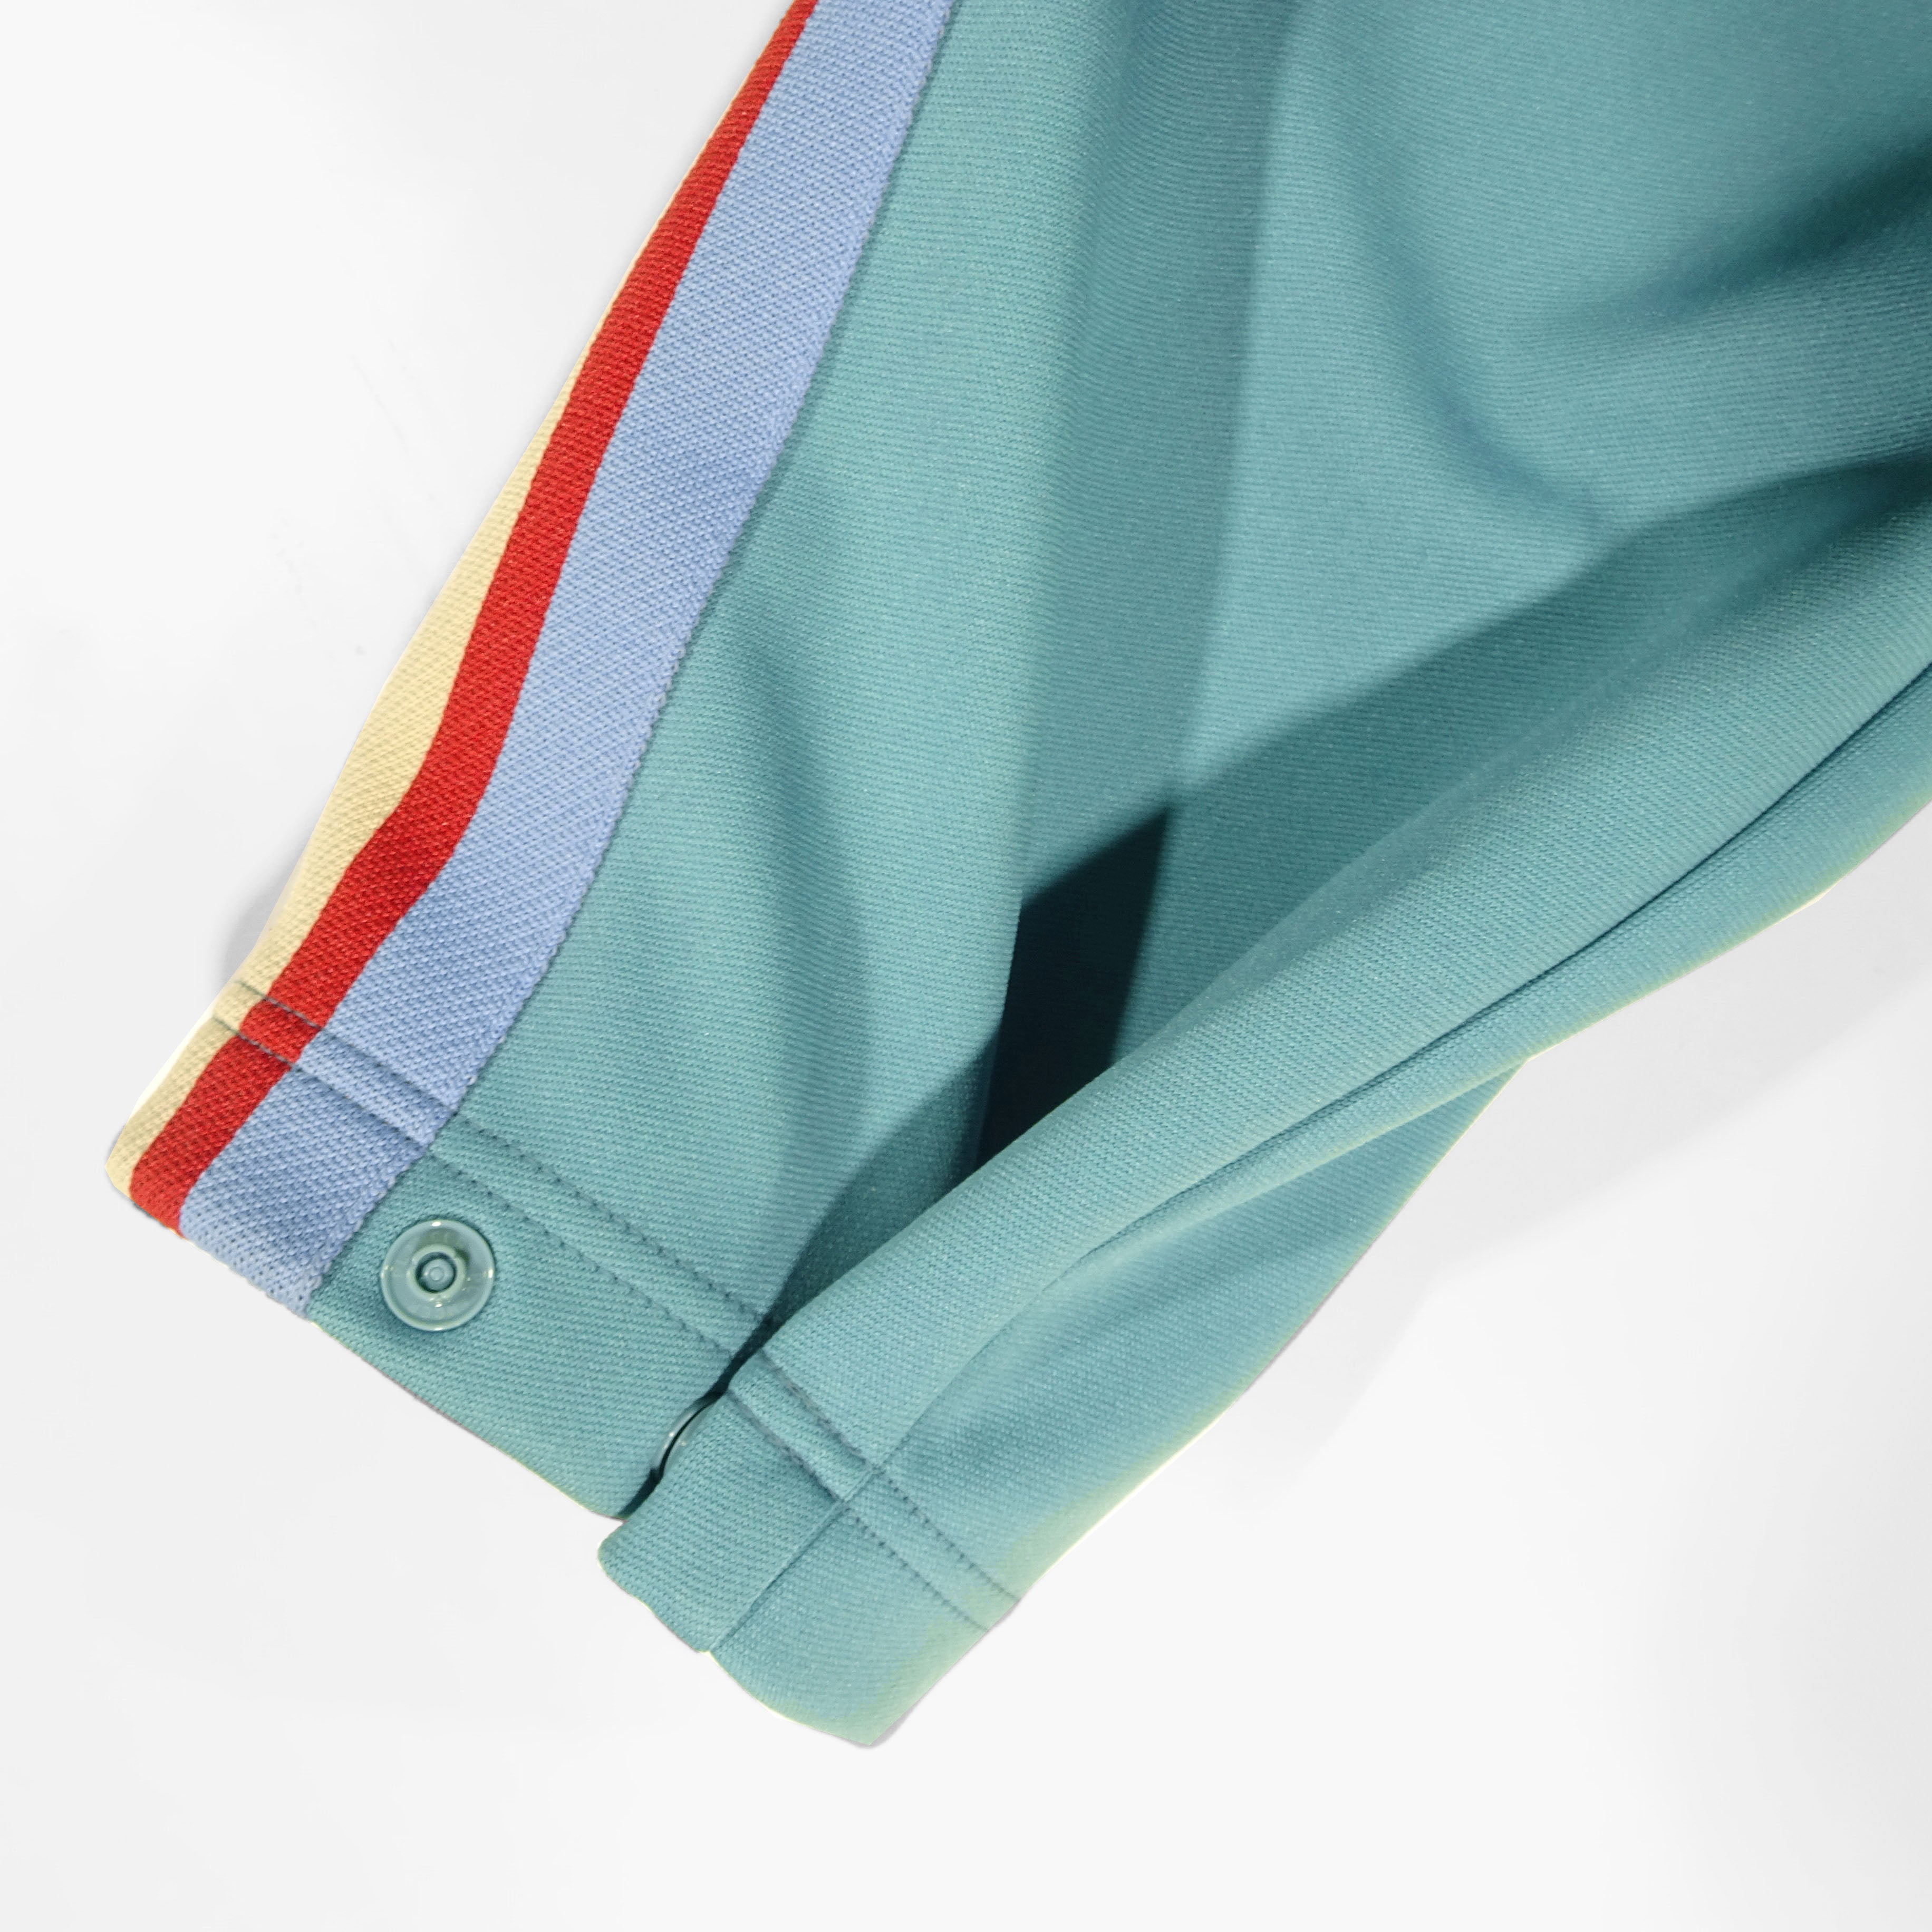 MUZE TURQUOISE LABEL - TRACK JERSEY PANTS(TURQUOISE×RED LINE 